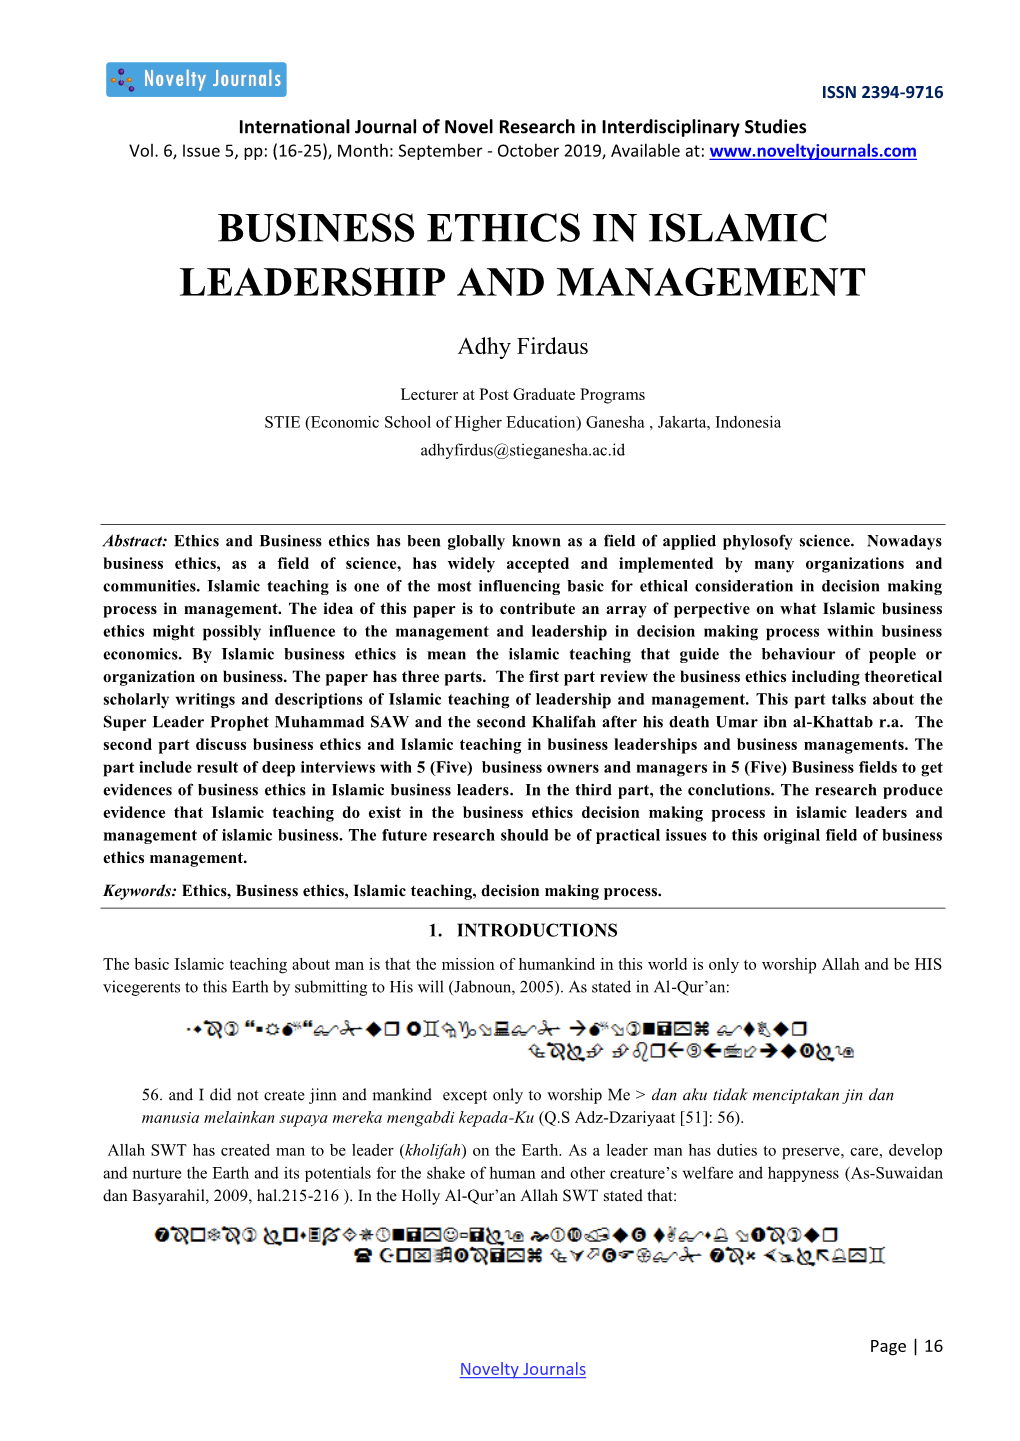 Business Ethics in Islamic Leadership and Management